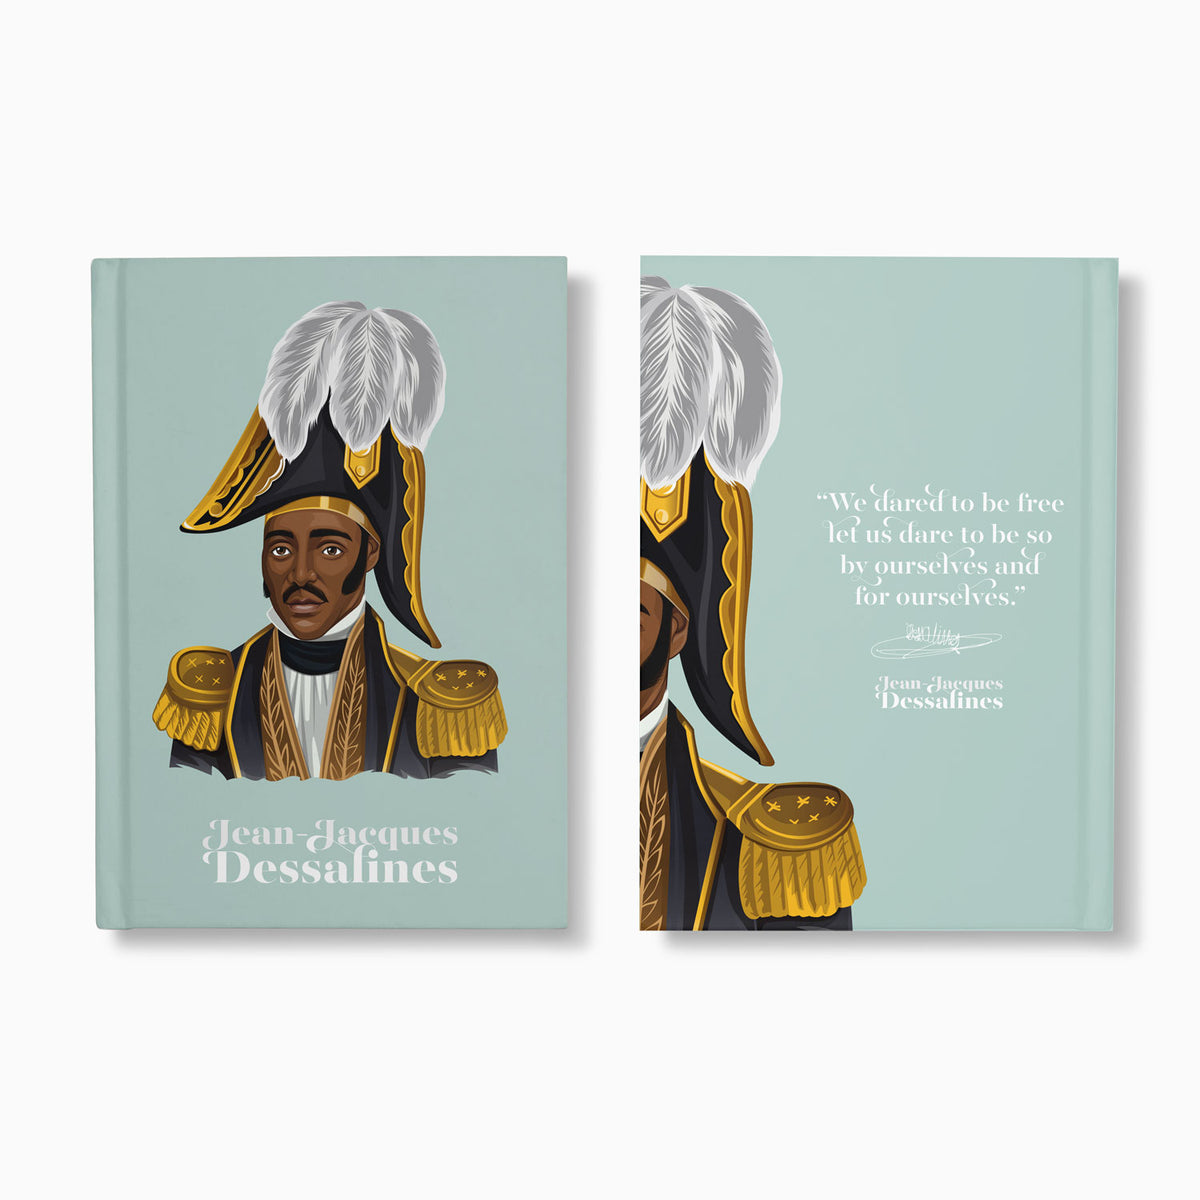 Jean Jacques Dessalines Notebooks front and back